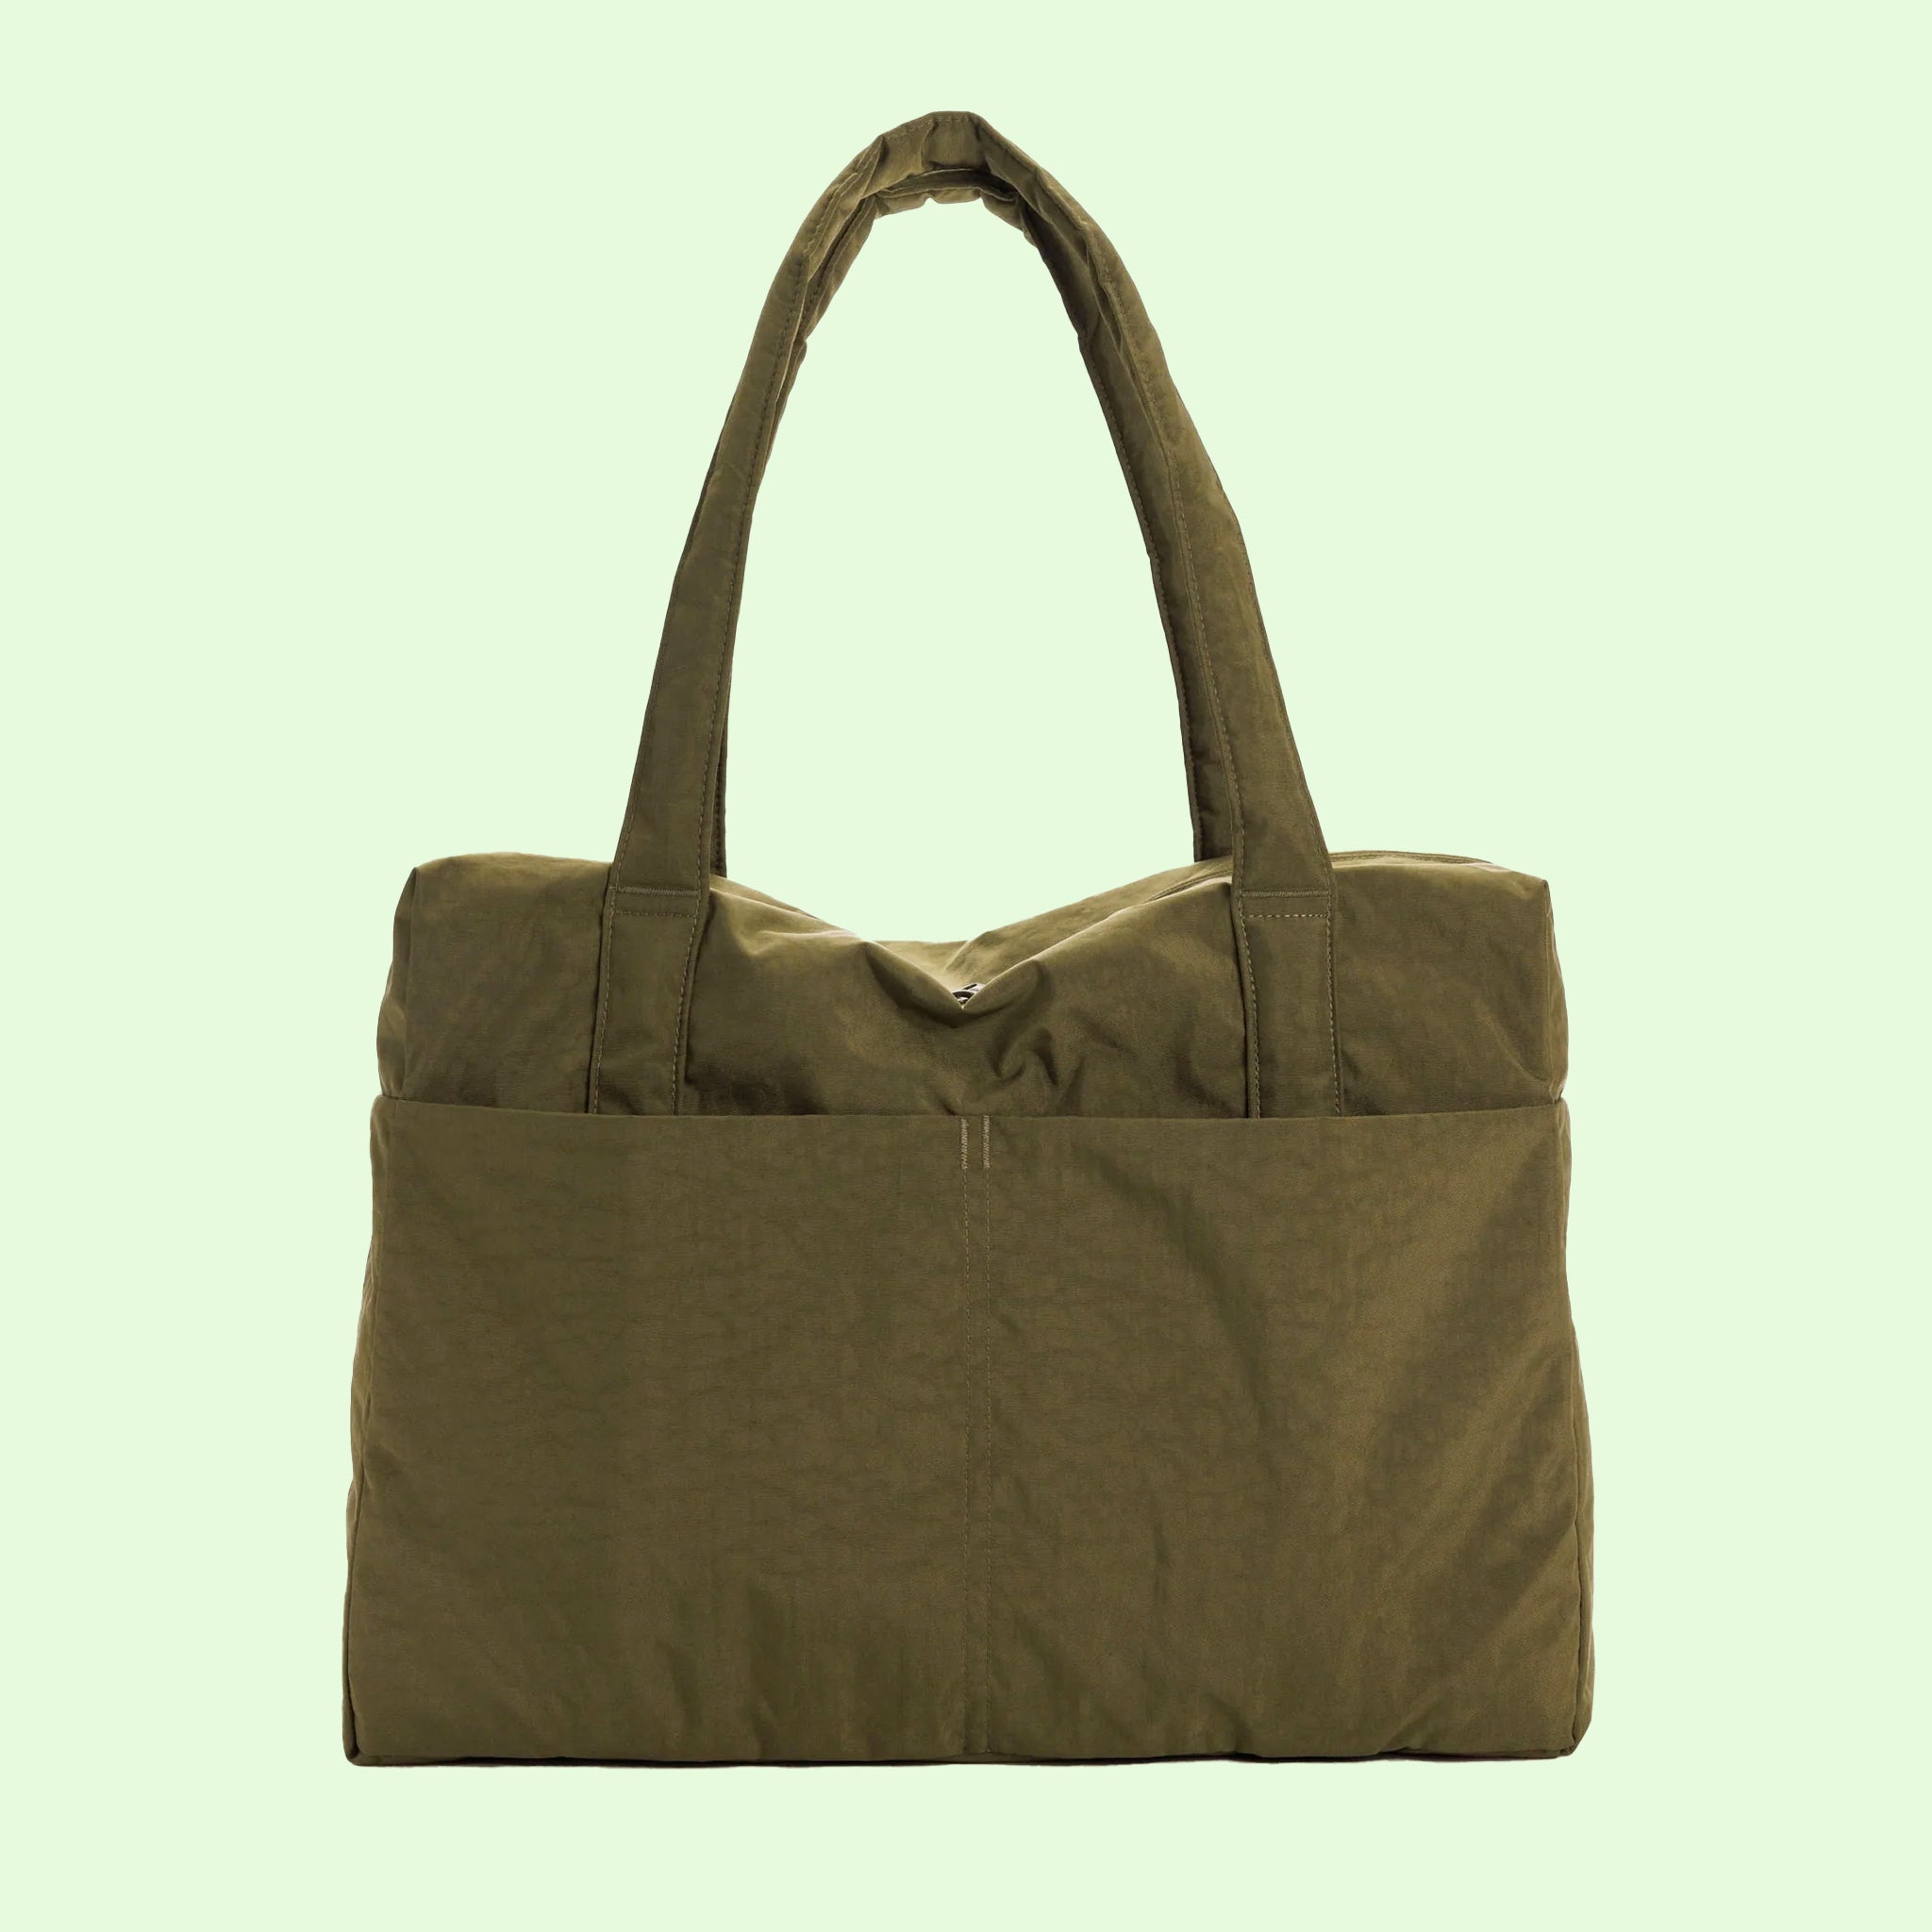 A green tote bag carry on. 